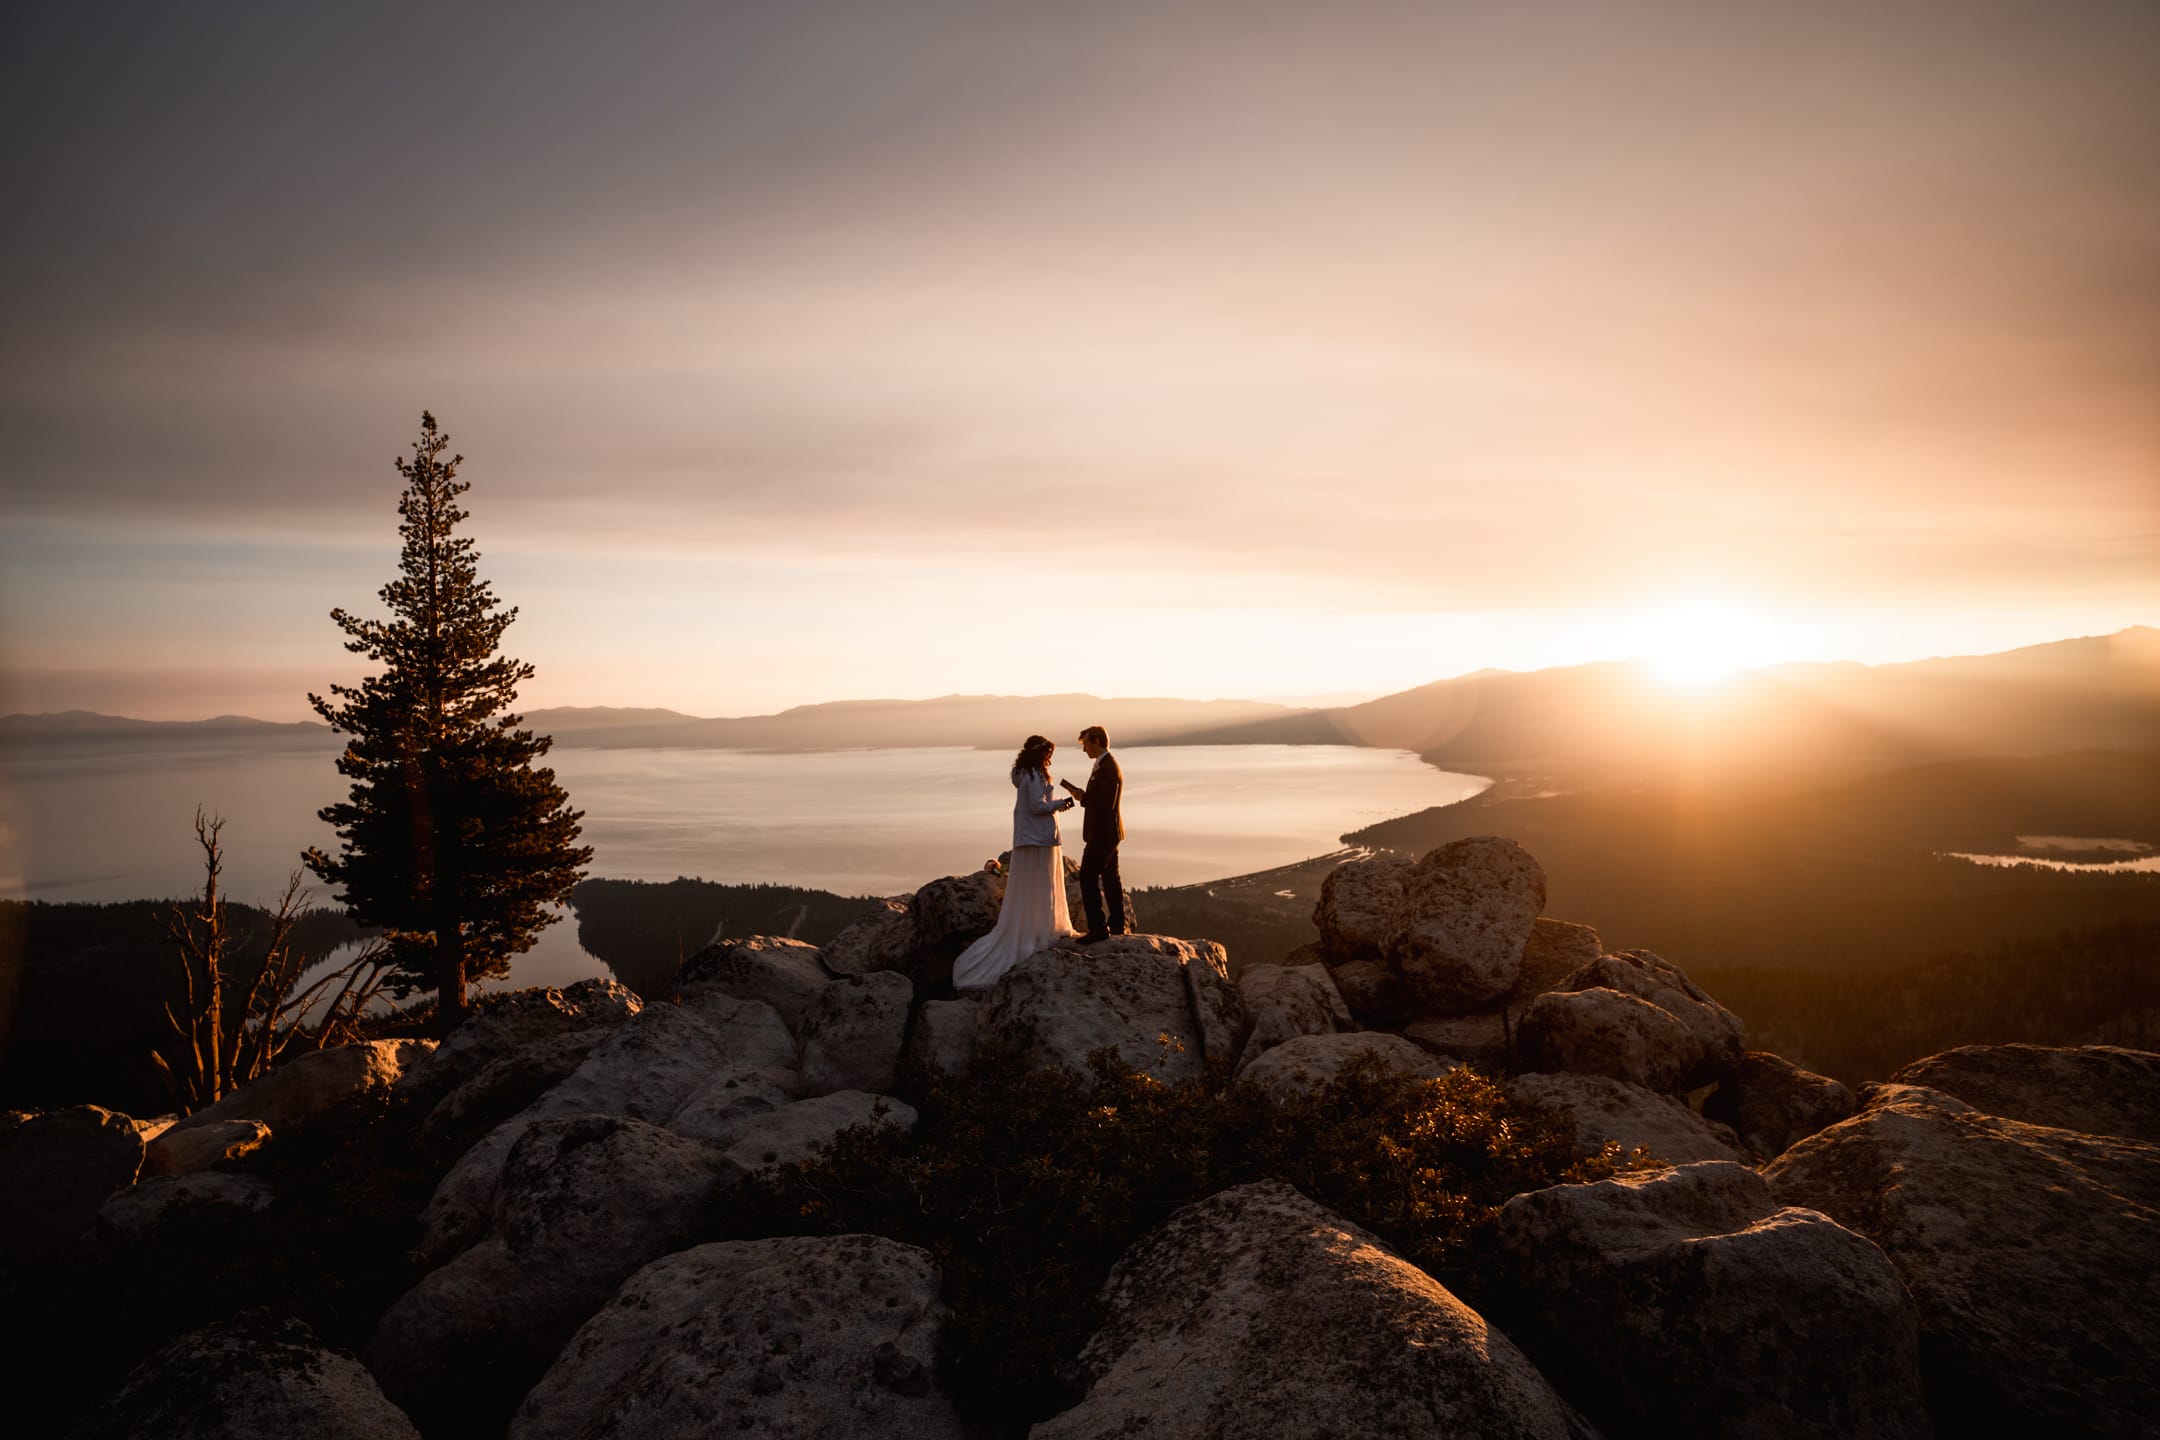 Beautiful wedding photo of Bride and Groom standing on mountain rocks with lake side view and sunset